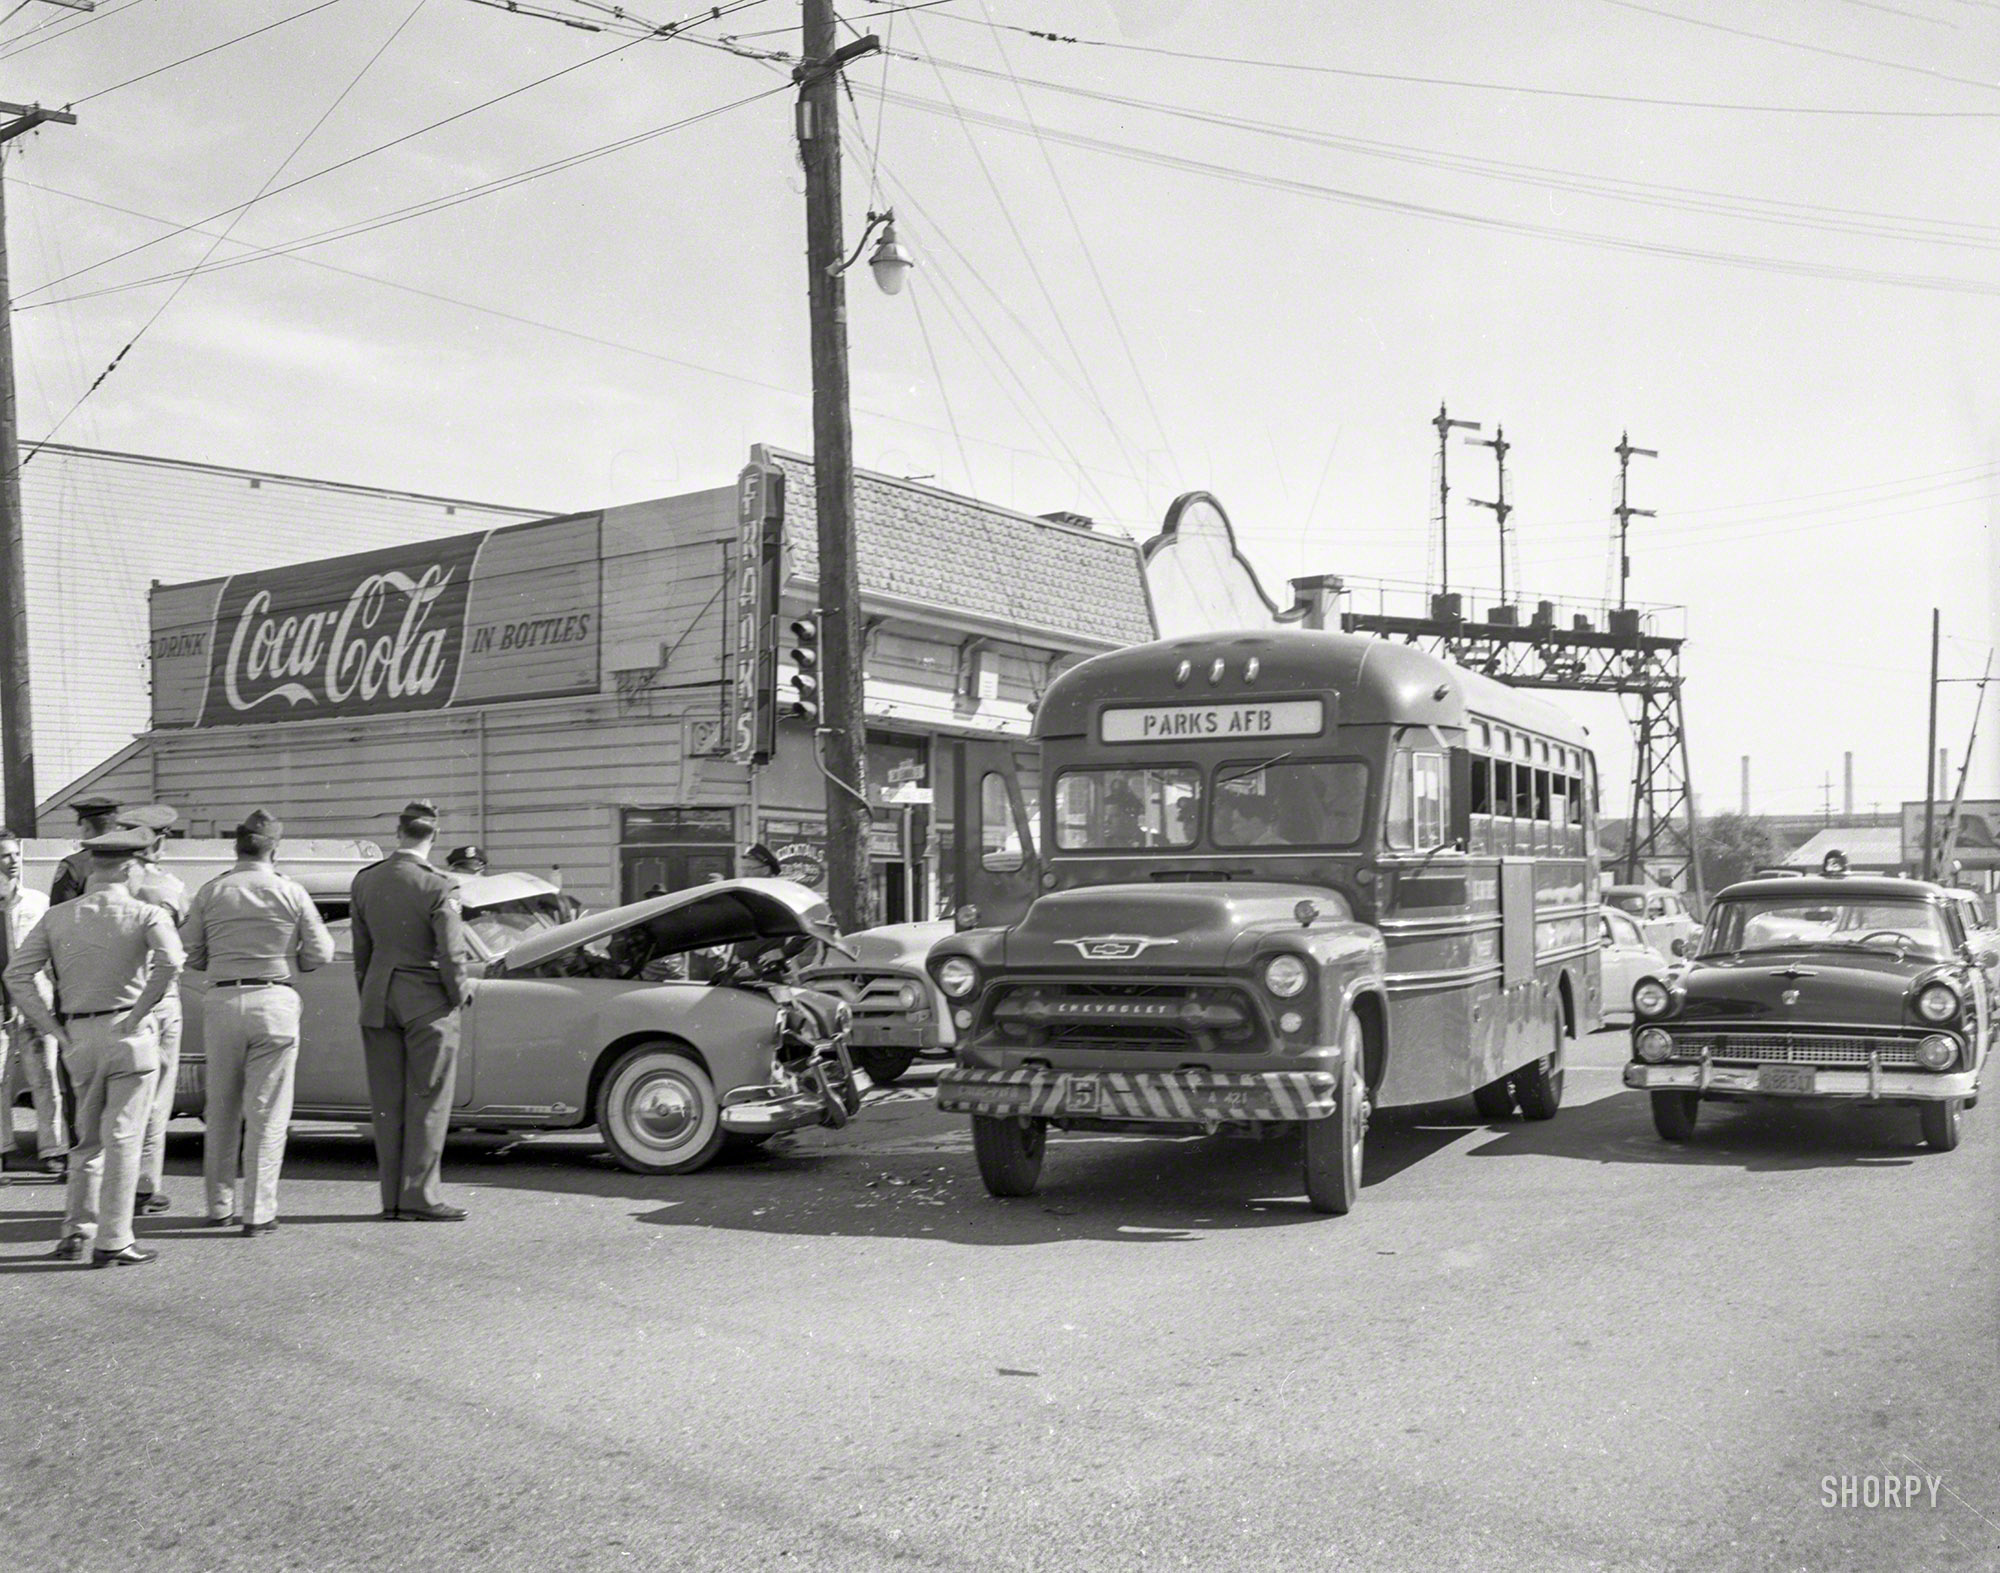 Oakland or vicinity circa 1957. "Collision with bus." Futuramic Oldsmobile meets military shuttle. And as long as we're at Frank's, how about a Coke? In bottles, of course. 4x5 acetate negative from the News Archive. View full size.